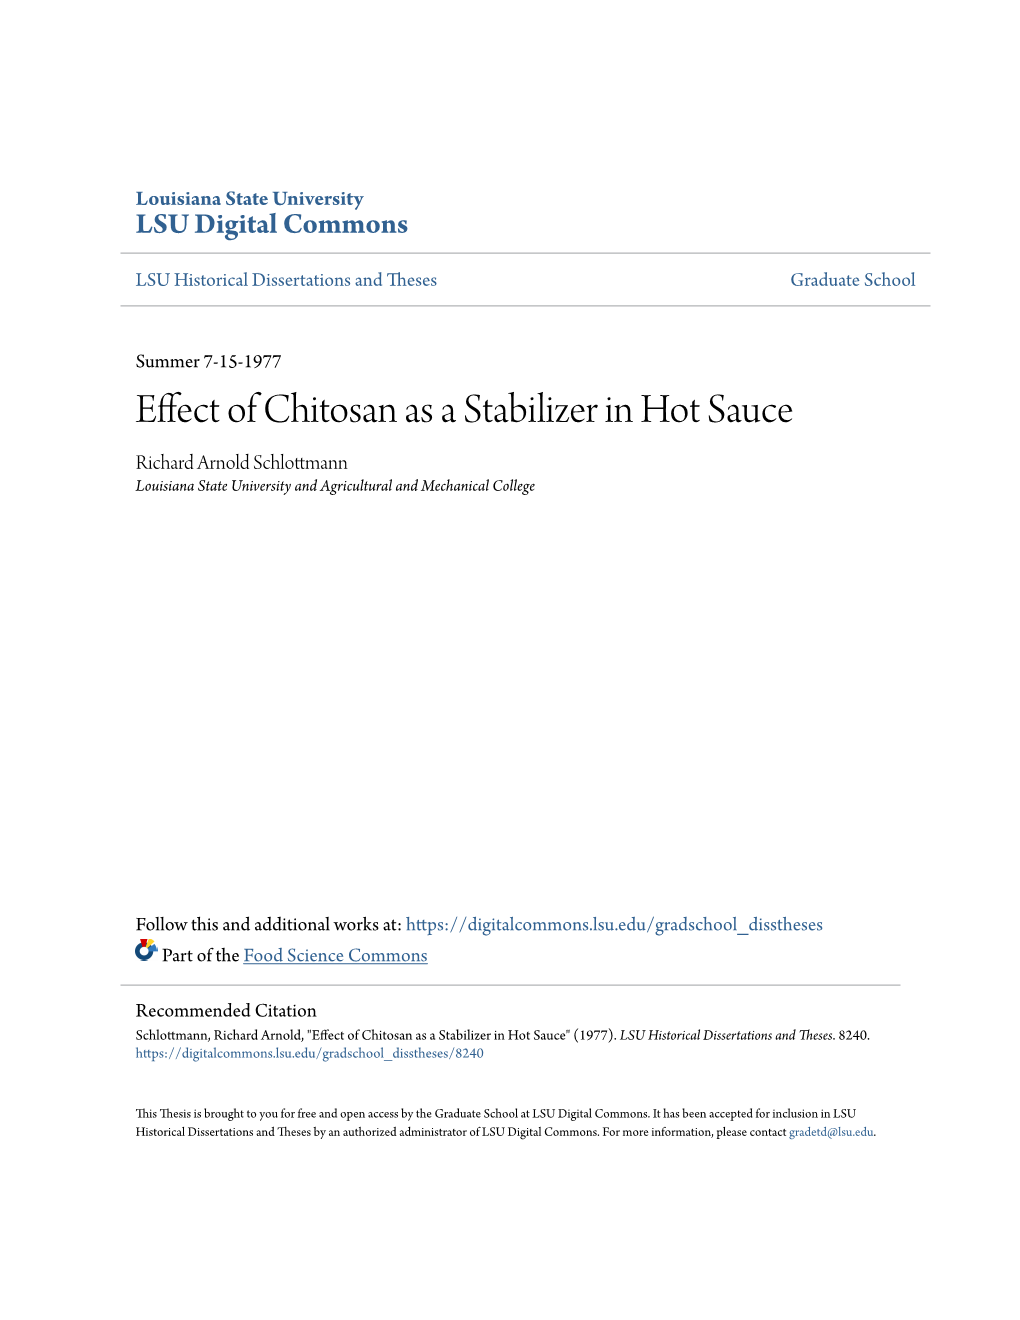 Effect of Chitosan As a Stabilizer in Hot Sauce Richard Arnold Schlottmann Louisiana State University and Agricultural and Mechanical College